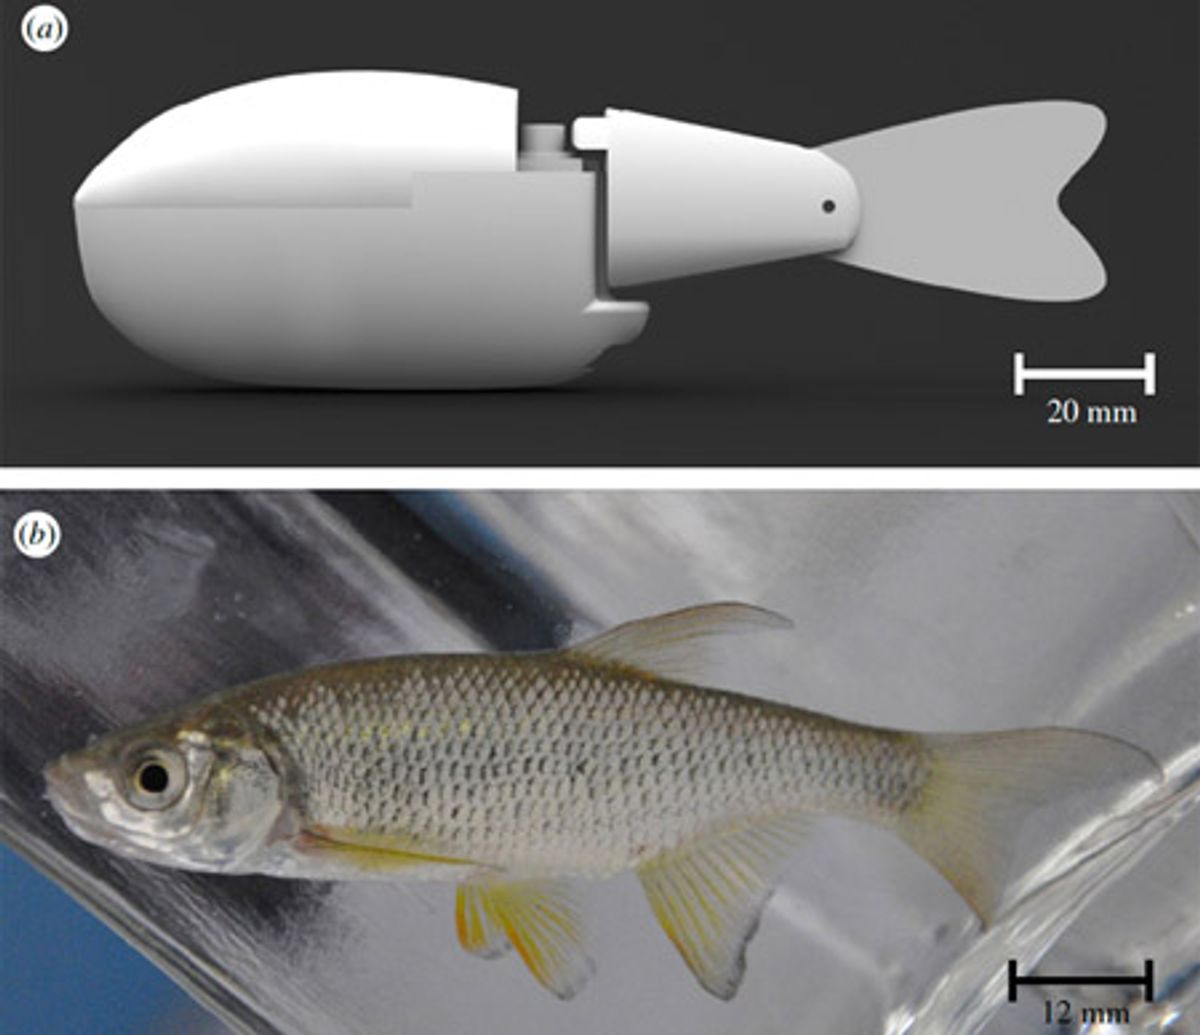 Real Fish Get Schooled By Robots